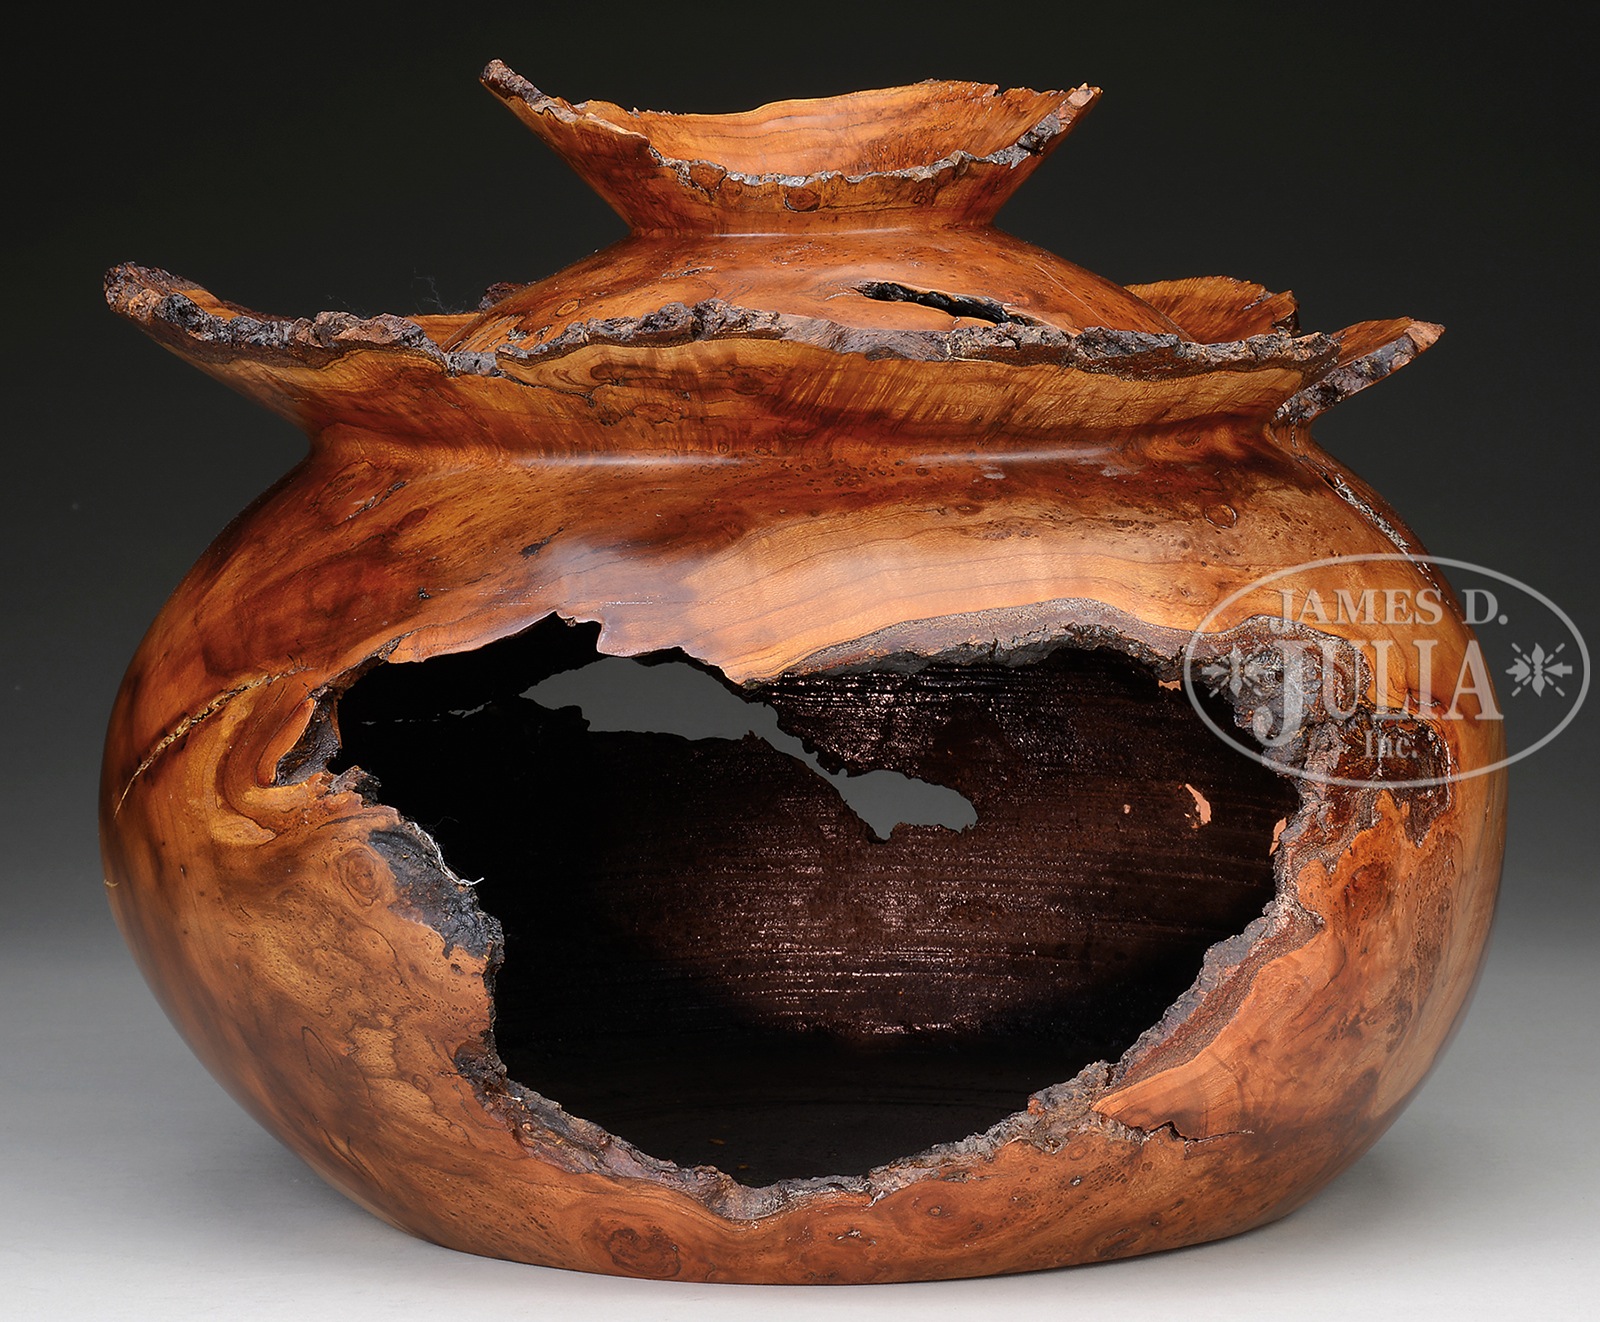 WONDERFUL CHERRY WOOD BURL CENTERPIECE. 20th/21st century. Burl carved from whole, having round